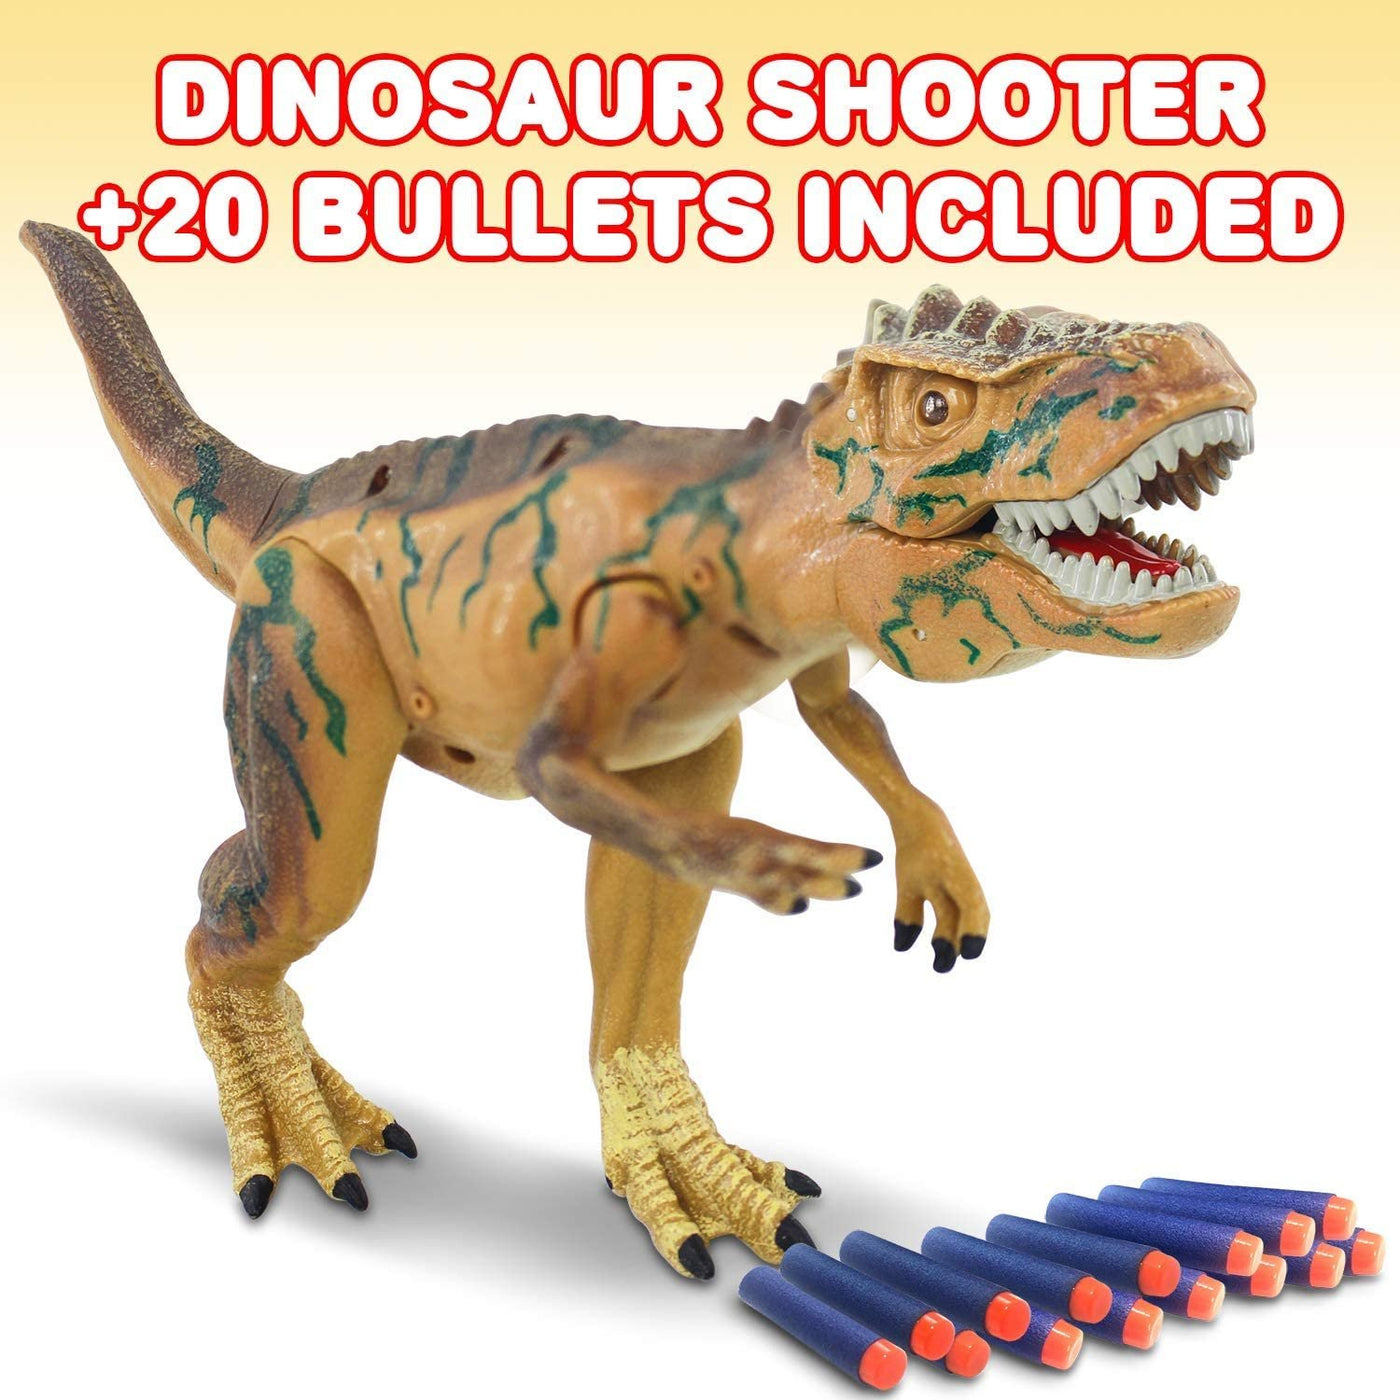 Ejection Dinosaur Gun, Light Up Dinosaur Toy Blaster with 20 Bullets and Roaring Sound, T-Rex Shooting Dinosaur for Boys and Girls, Super Realistic Look, Best Birthday Gift for Kids 3+